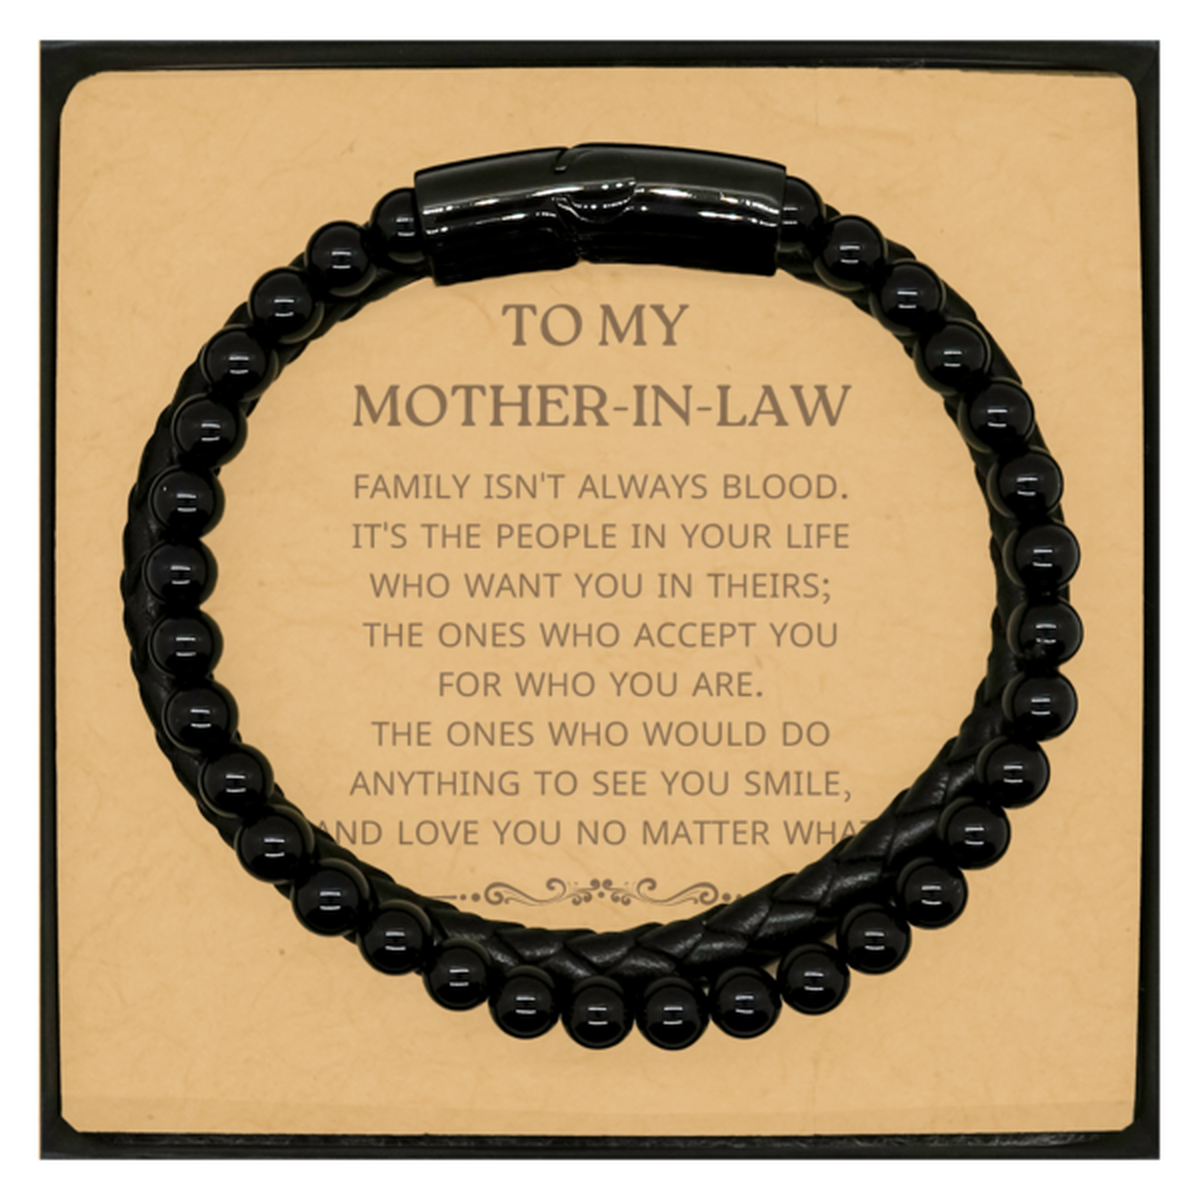 To My Mother-In-Law Gifts, Family isn't always blood, Mother-In-Law Stone Leather Bracelets, Birthday Christmas Unique Present For Mother-In-Law